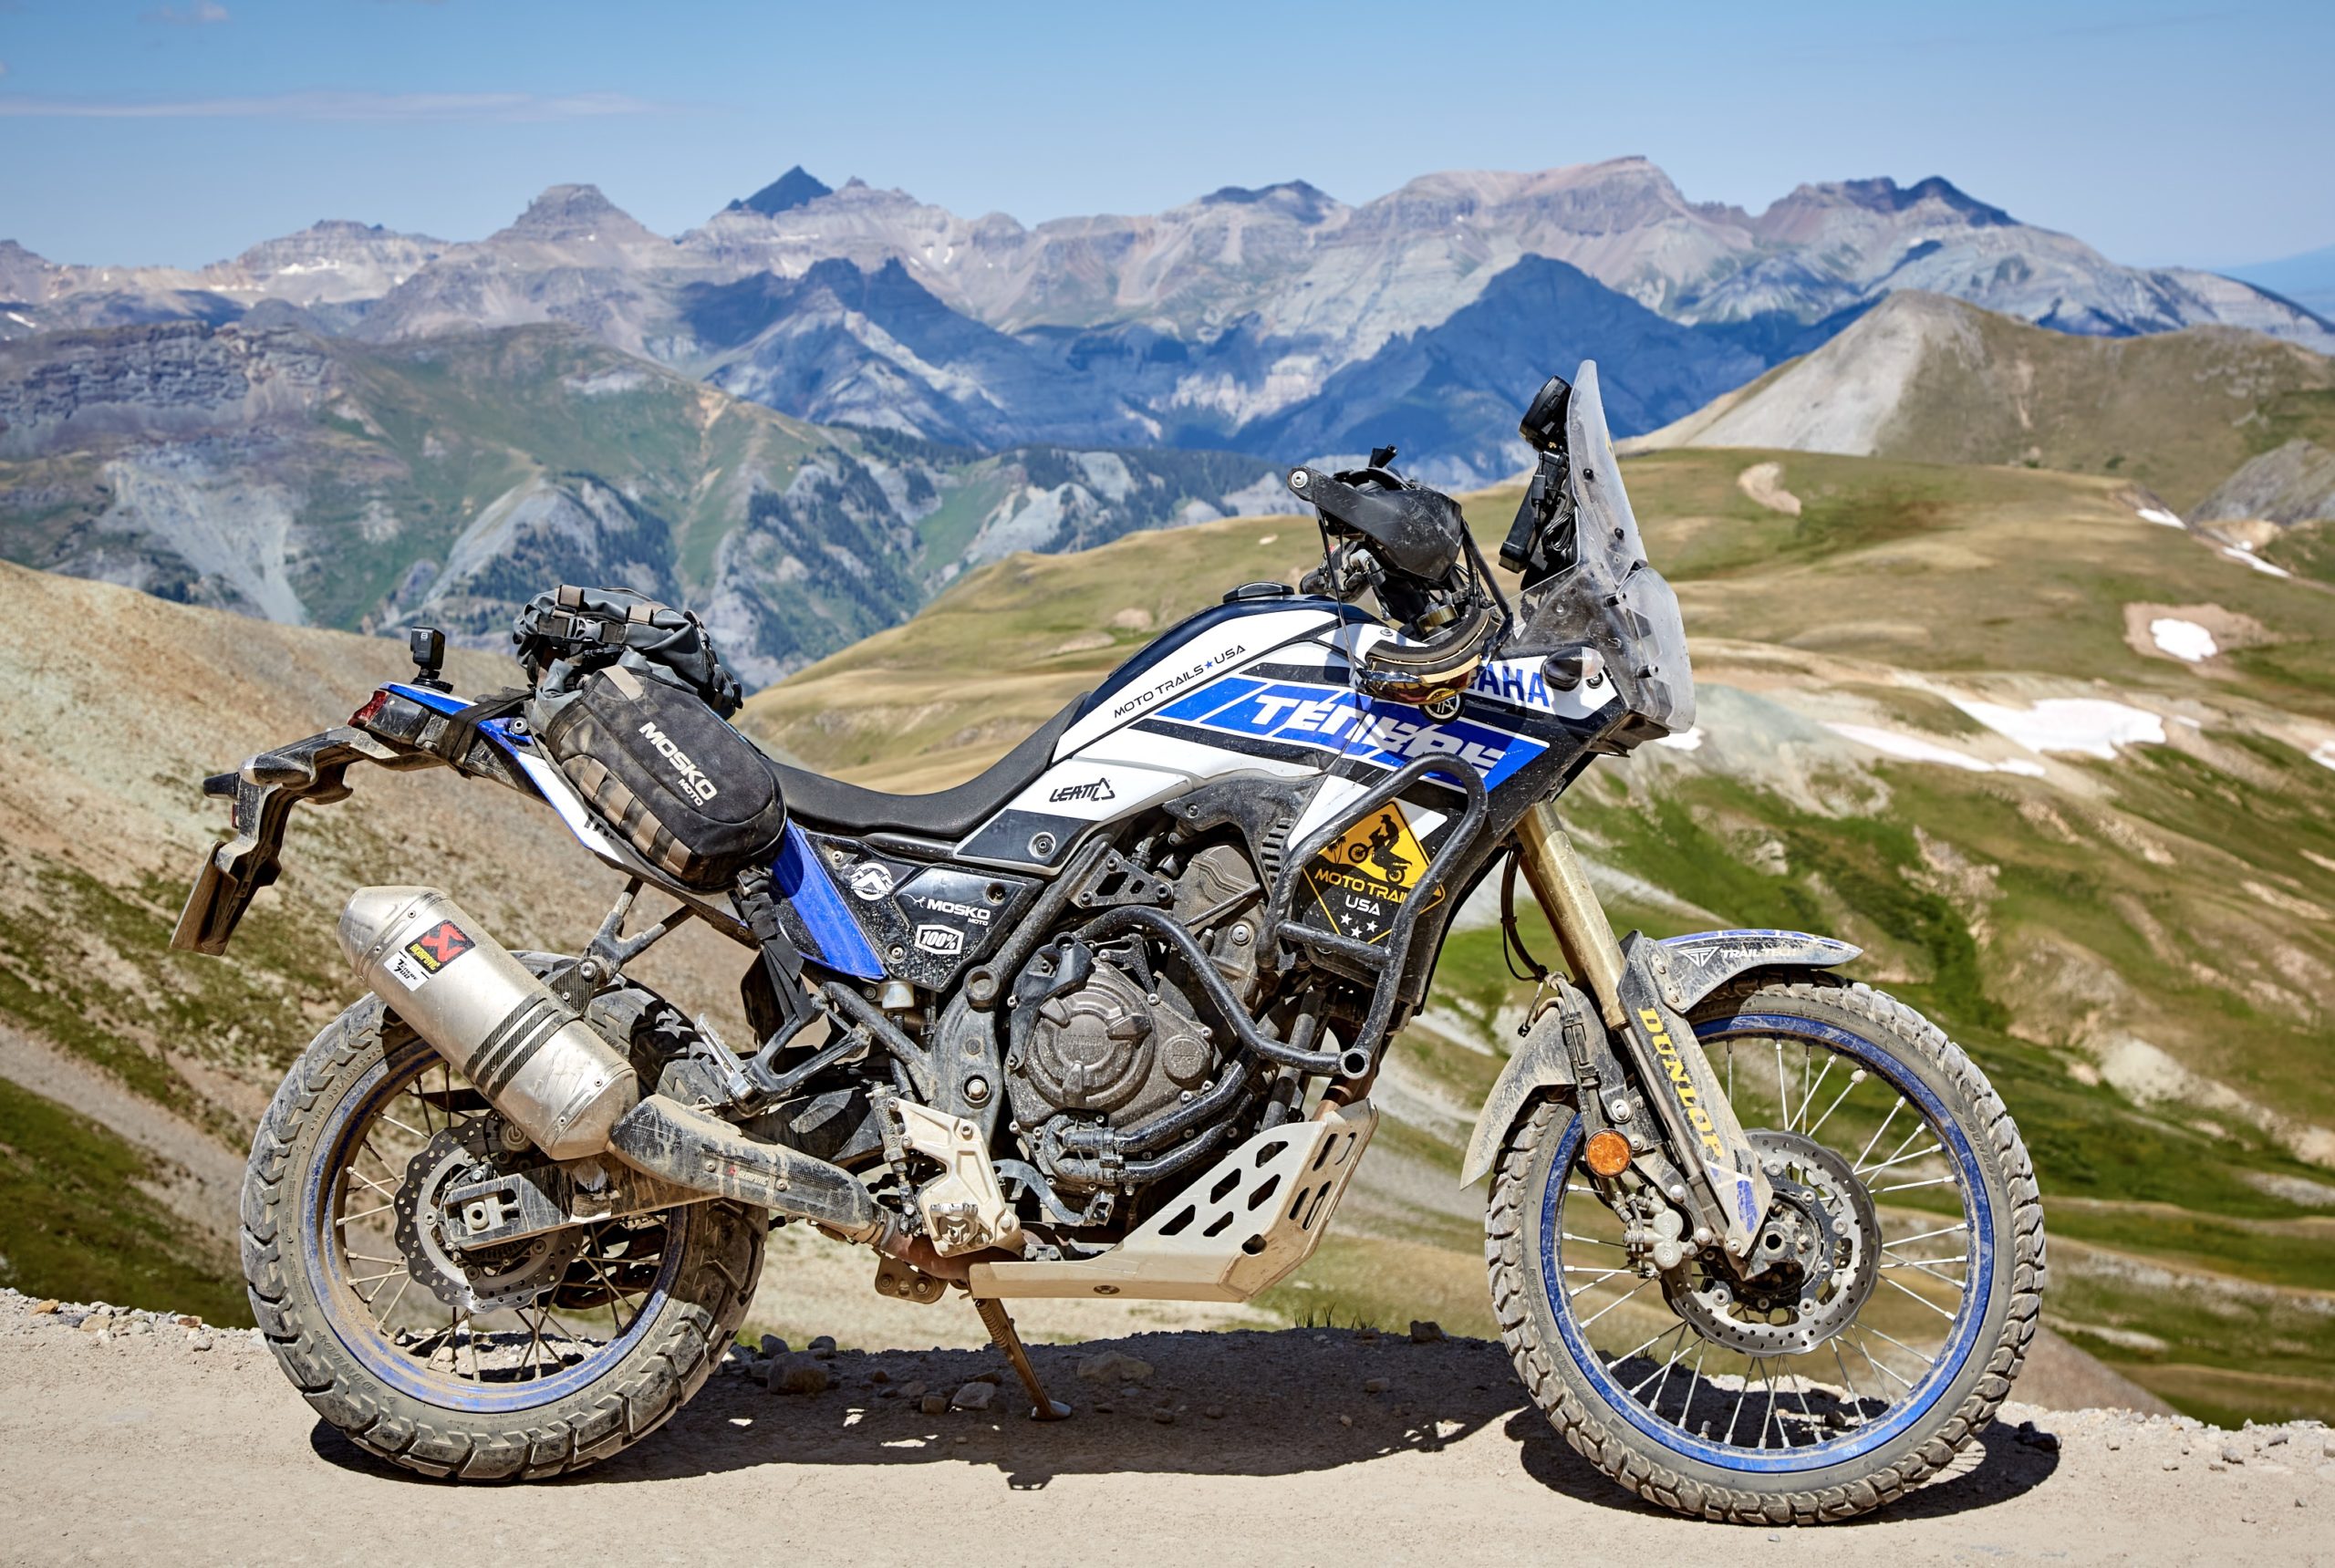 Tenere 700 | Moto Trails USA motorcycle tours in the USA - Yamaha